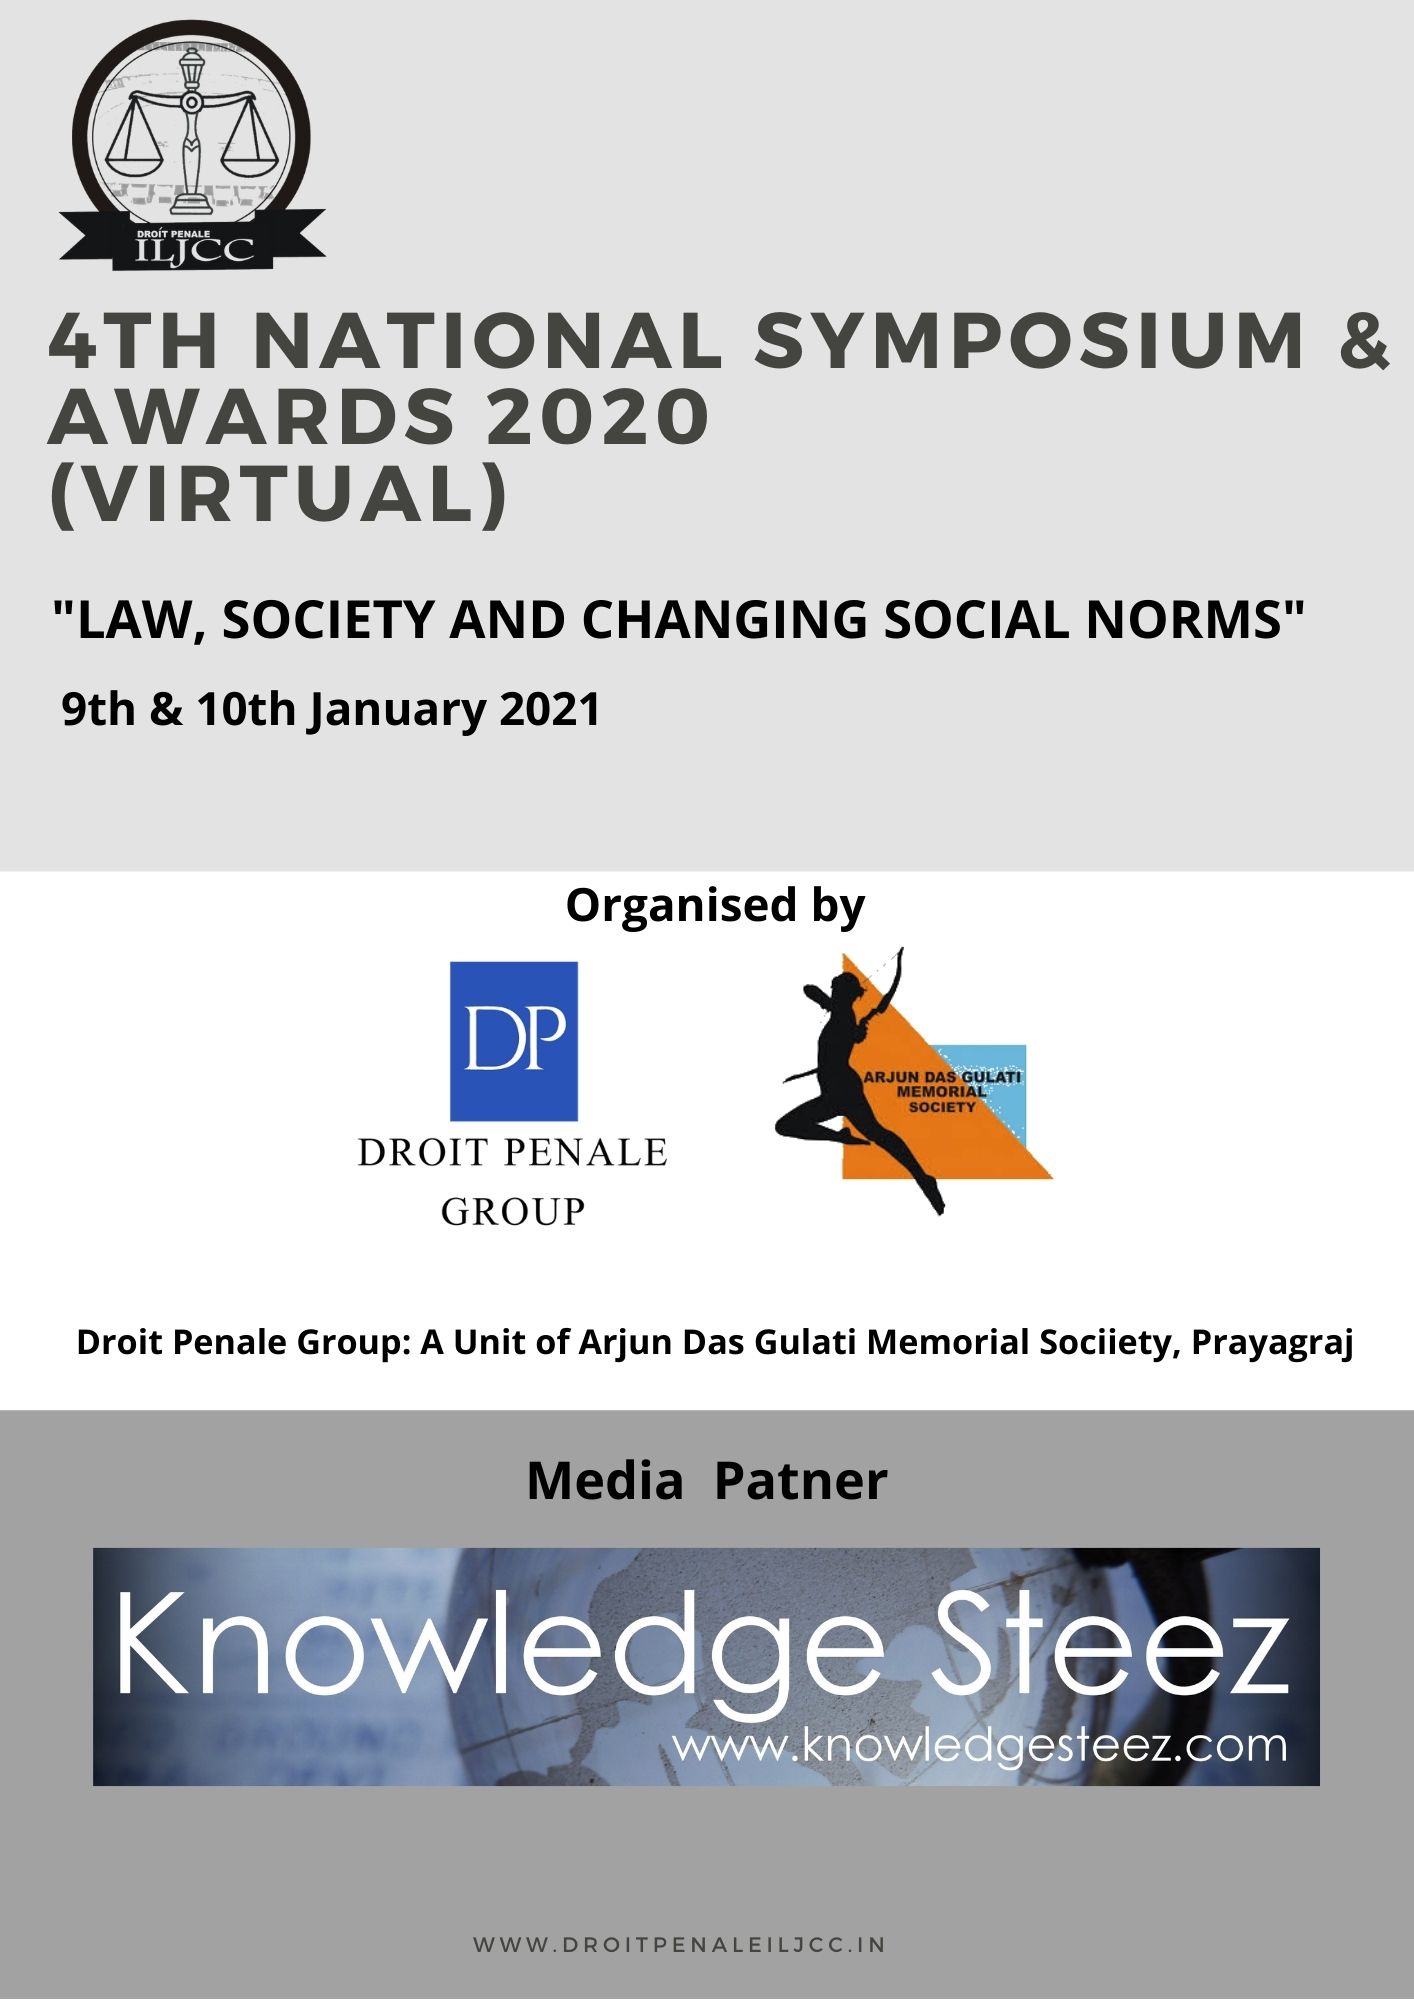 4TH NATIONAL SYMPOSIUM & AWARDS; REGISTER BY 20TH DECEMBER (NO…